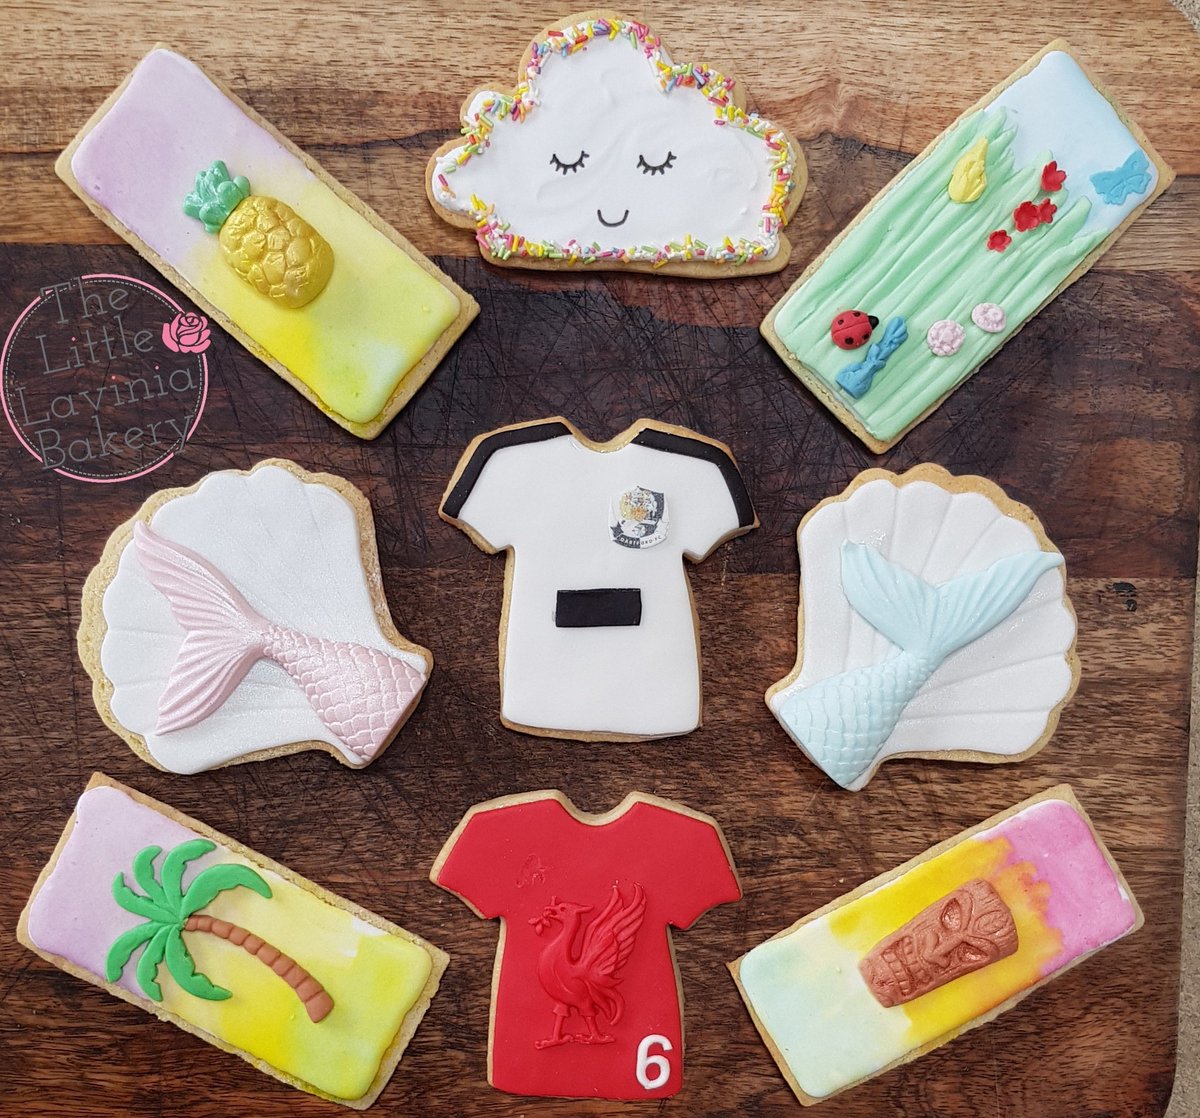 Cookies ready for tomorrow's @dartfordfc #CommunityDay - which one's your favourite? #Dartford #dartfordfc #cookies #couldnthelpmyself #sorrynotsorry #haventcheckedtheweather